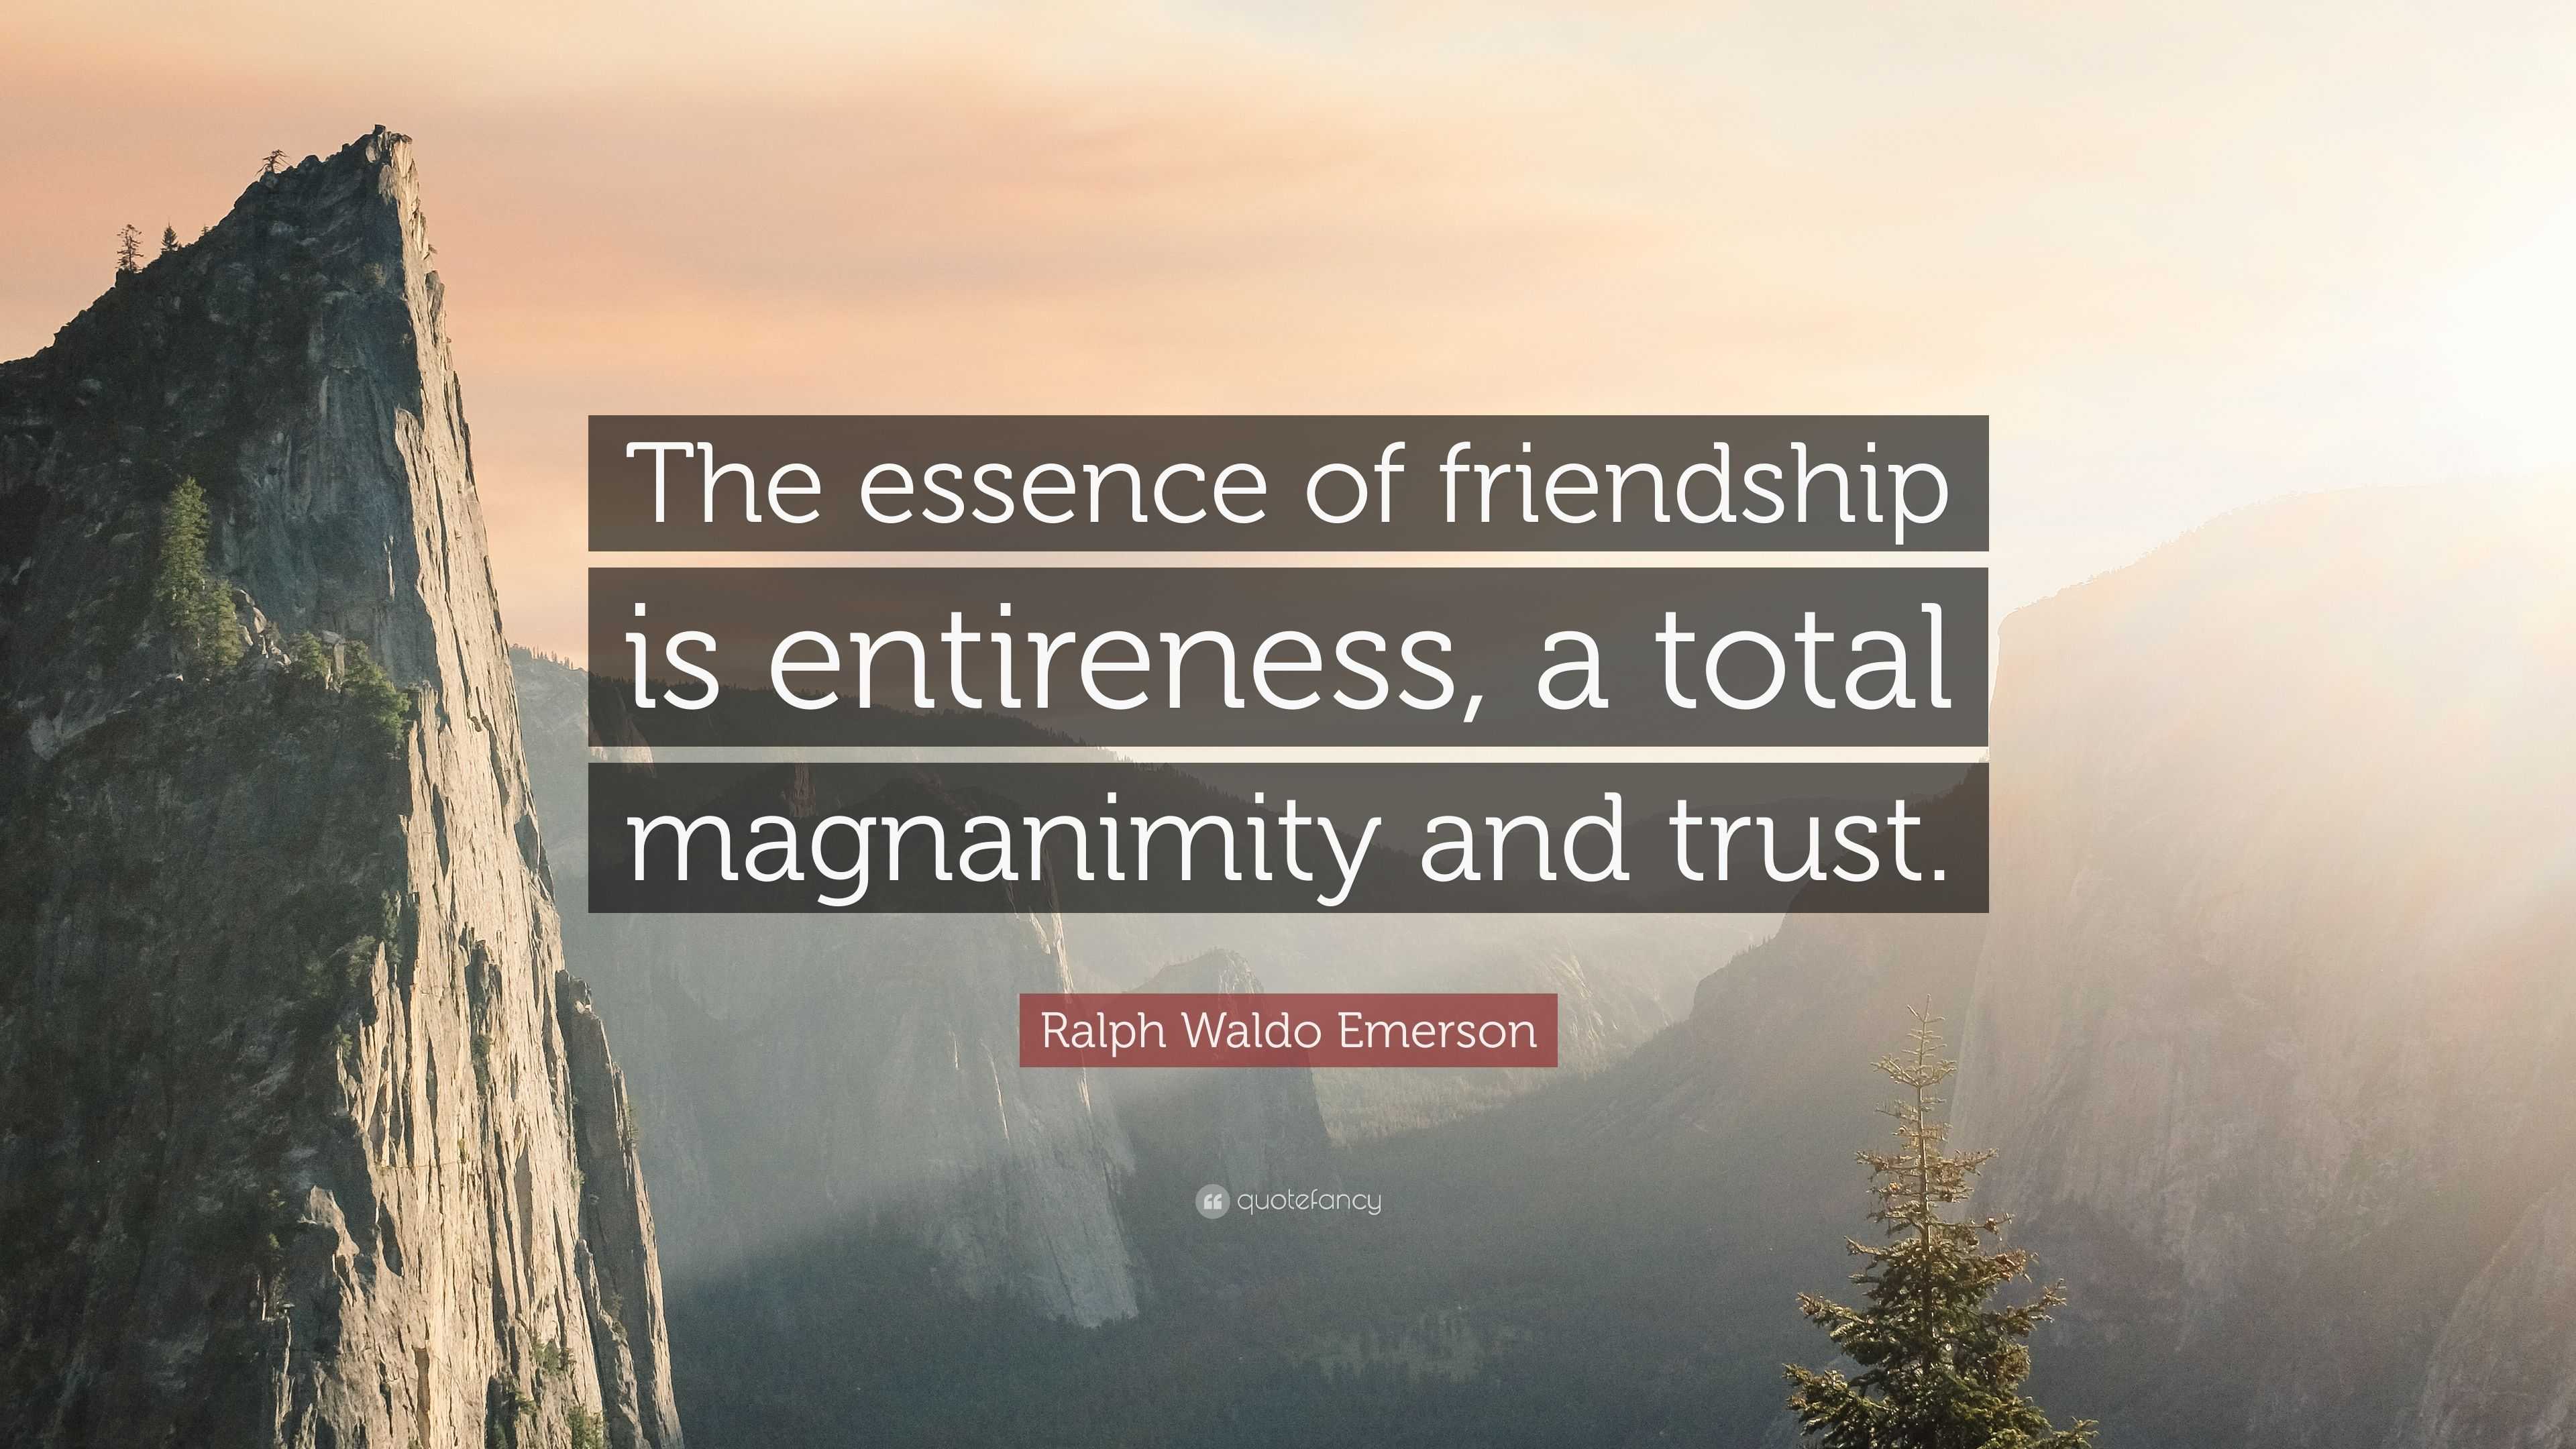 Ralph Waldo Emerson Quote: “The essence of friendship is entireness, a